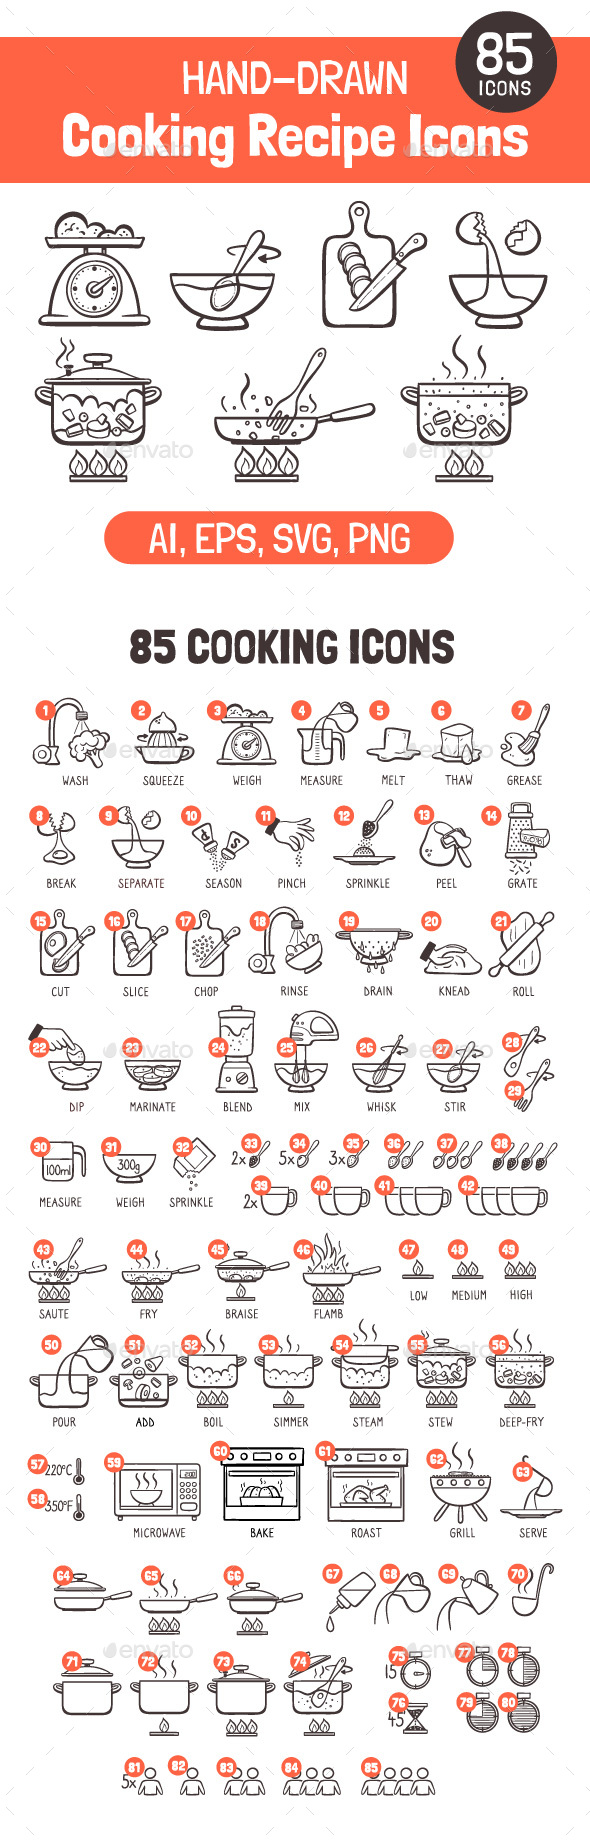 [DOWNLOAD]Hand-Drawn Cooking Recipe Icons